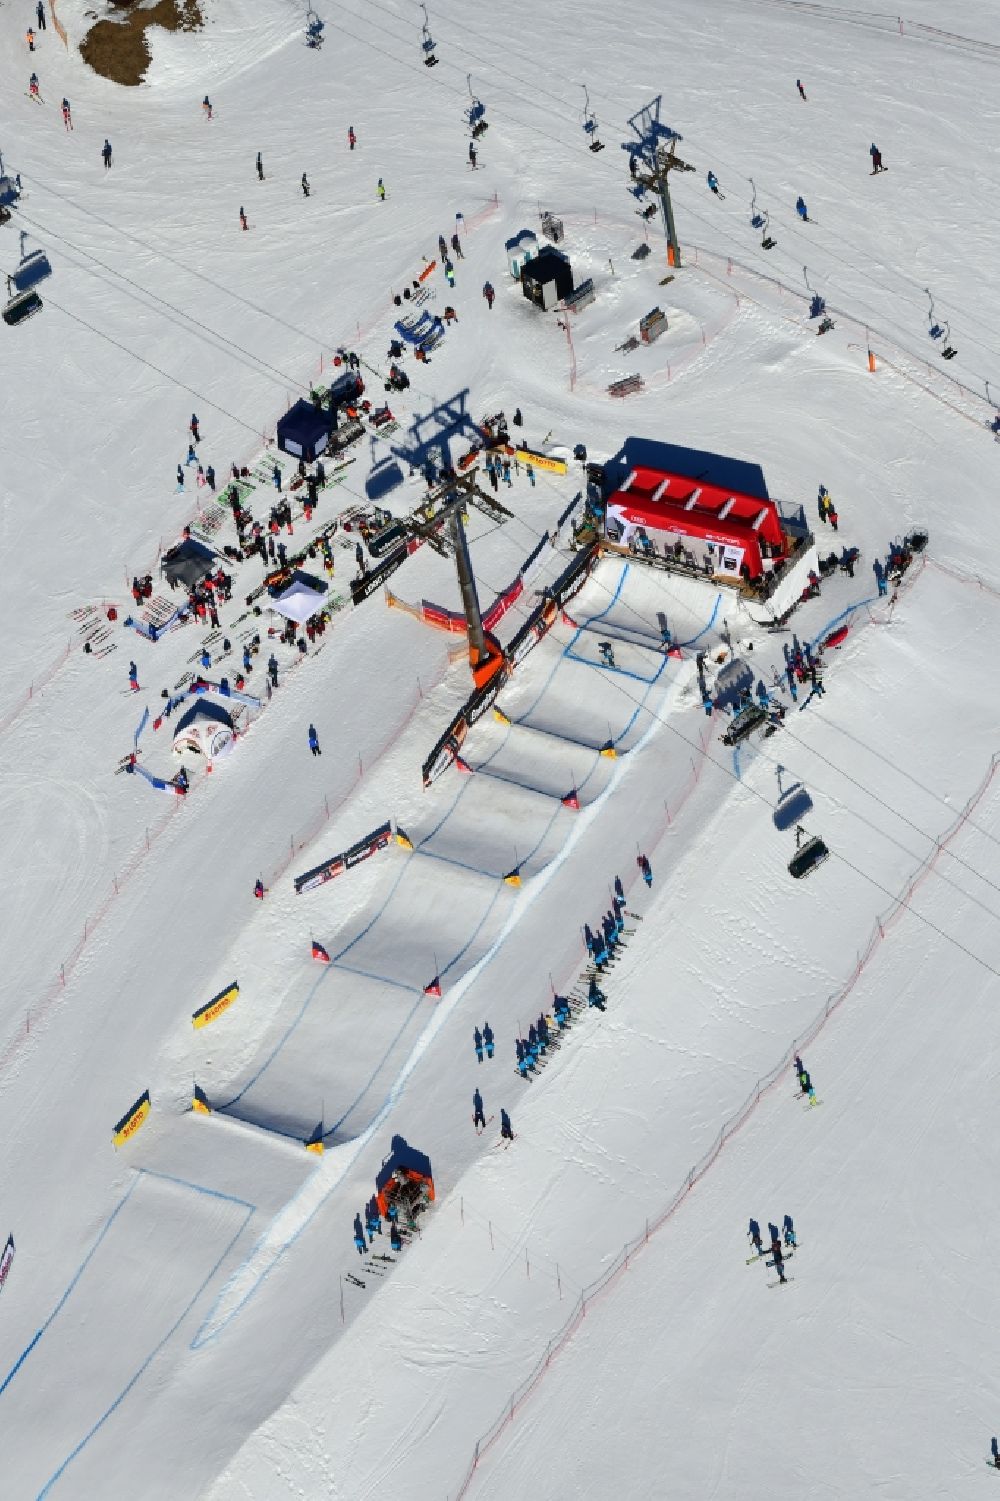 Feldberg (Schwarzwald) from the bird's eye view: Wintry snowy landscape with the start area for the World Cup Ski Cross at the ski sports area Seebuck on the Feldberg mountain in Feldberg (Schwarzwald) in the state Baden-Wurttemberg, Germany